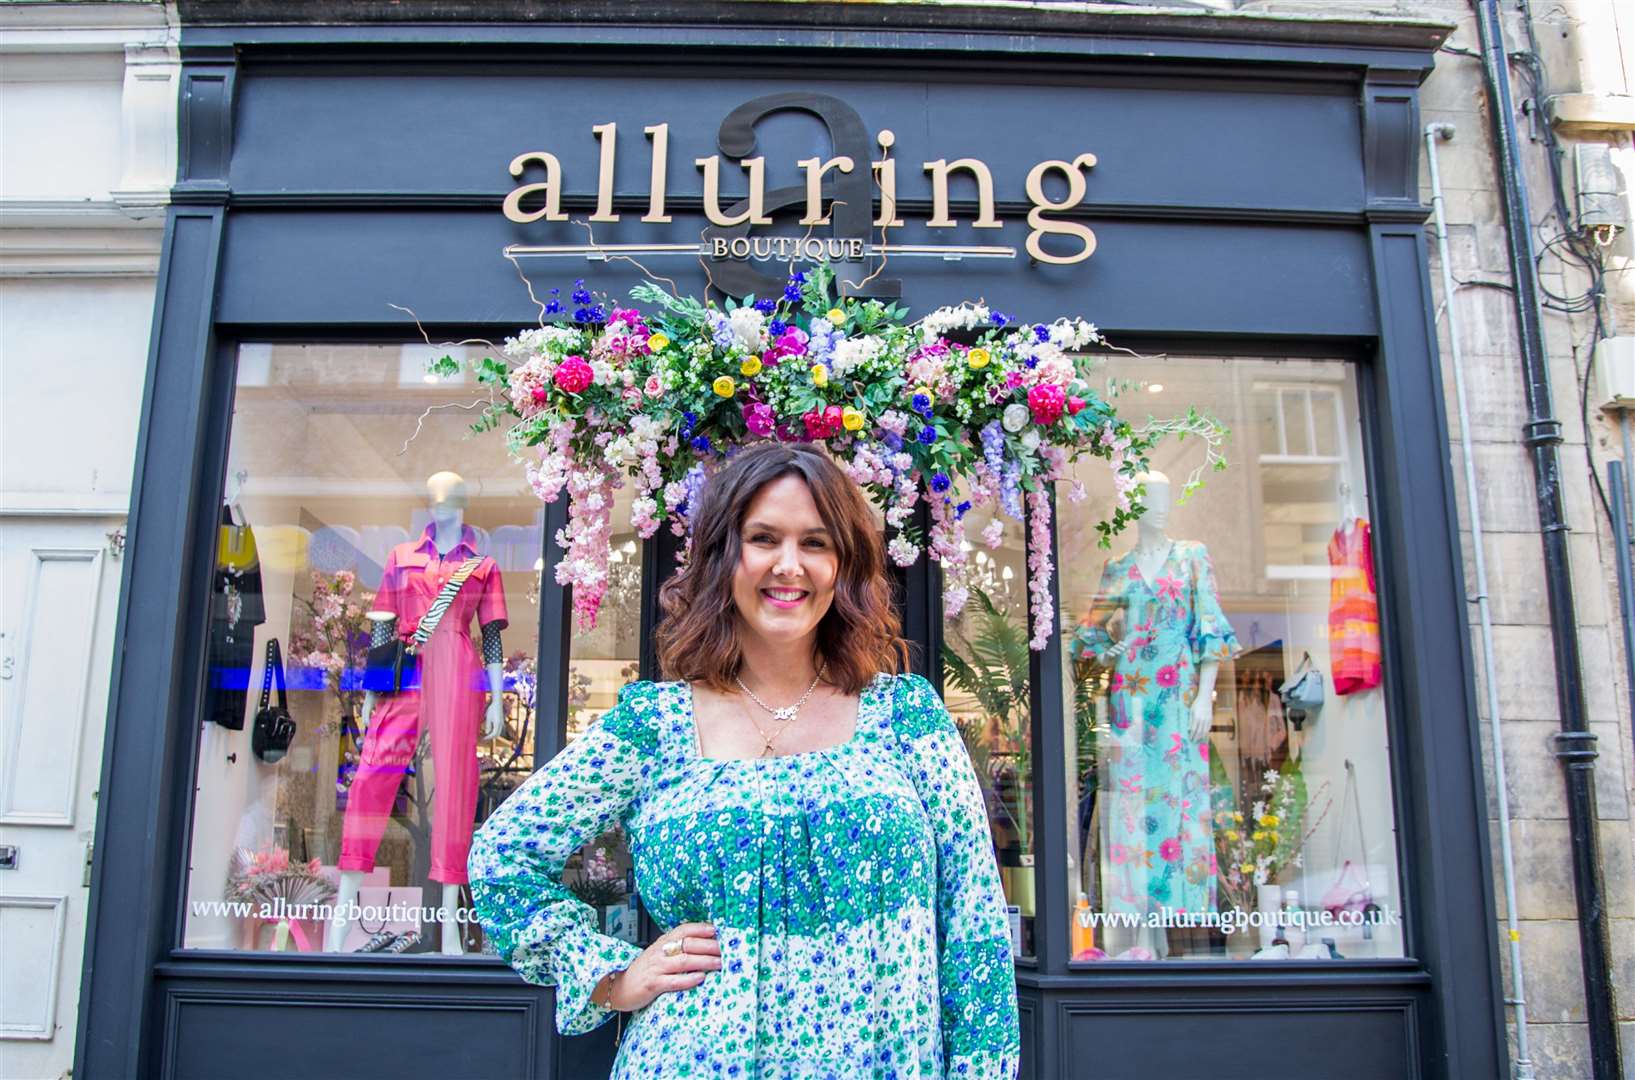 Alluring Boutique owner Deborah Smethurst is just one of many shop owners excited ahead of reopening on April 26. Picture: Becky Saunderson